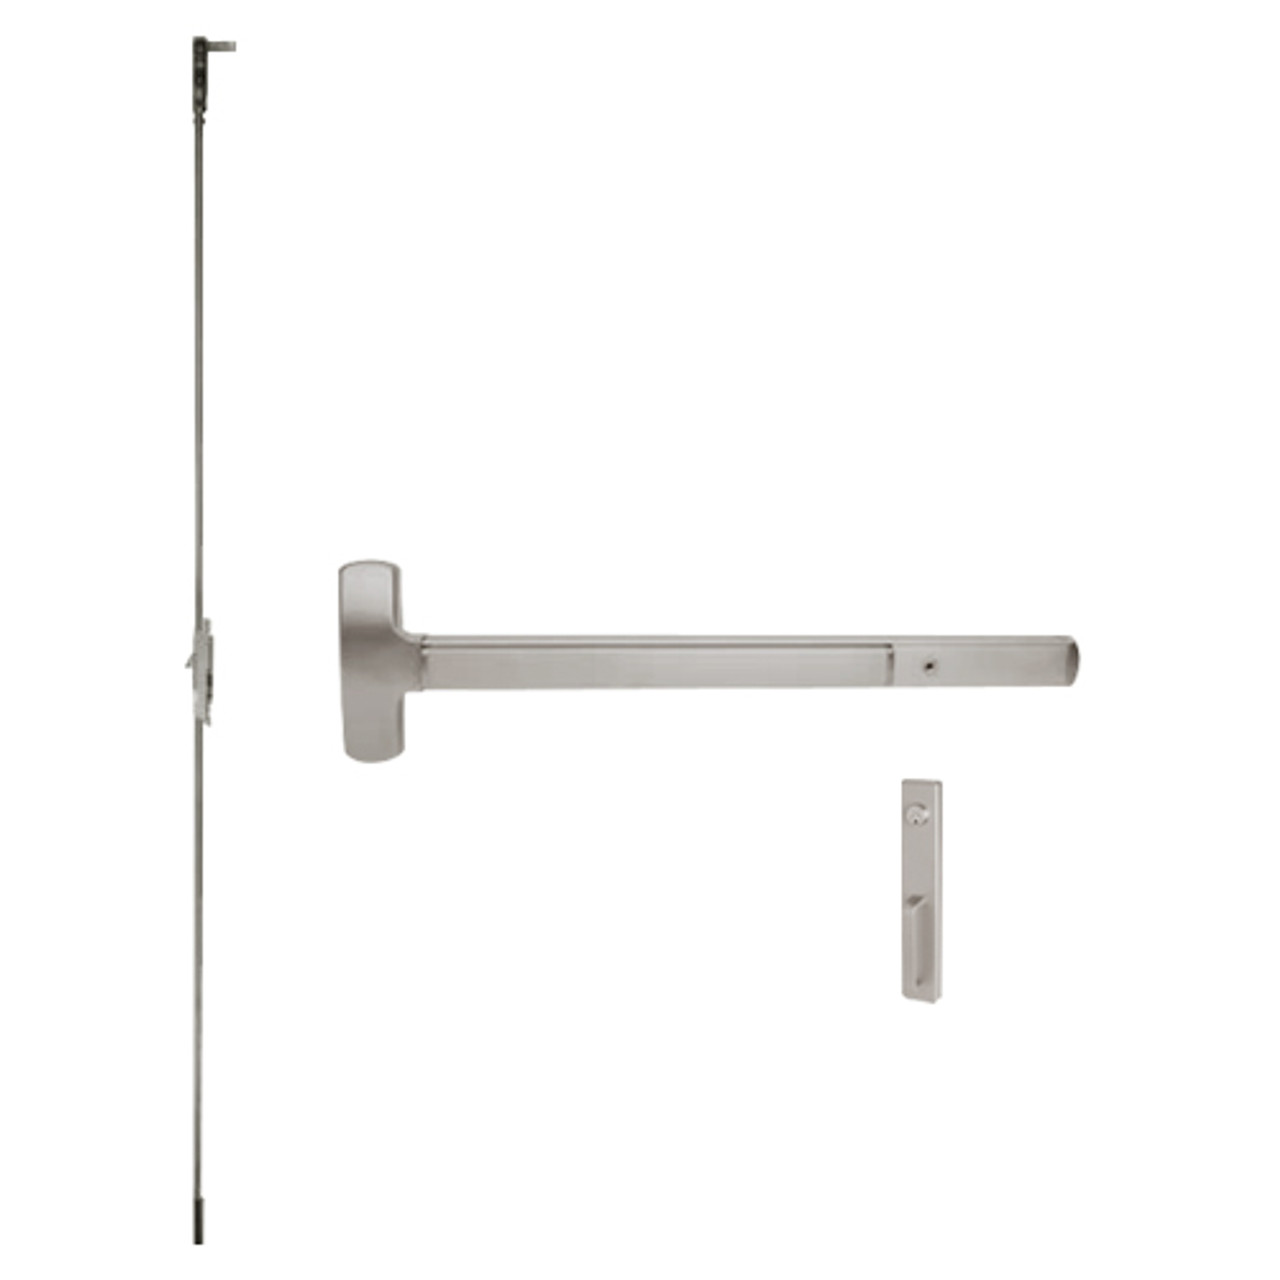 25-C-NL-US32D-4 Falcon Exit Device in Satin Stainless Steel